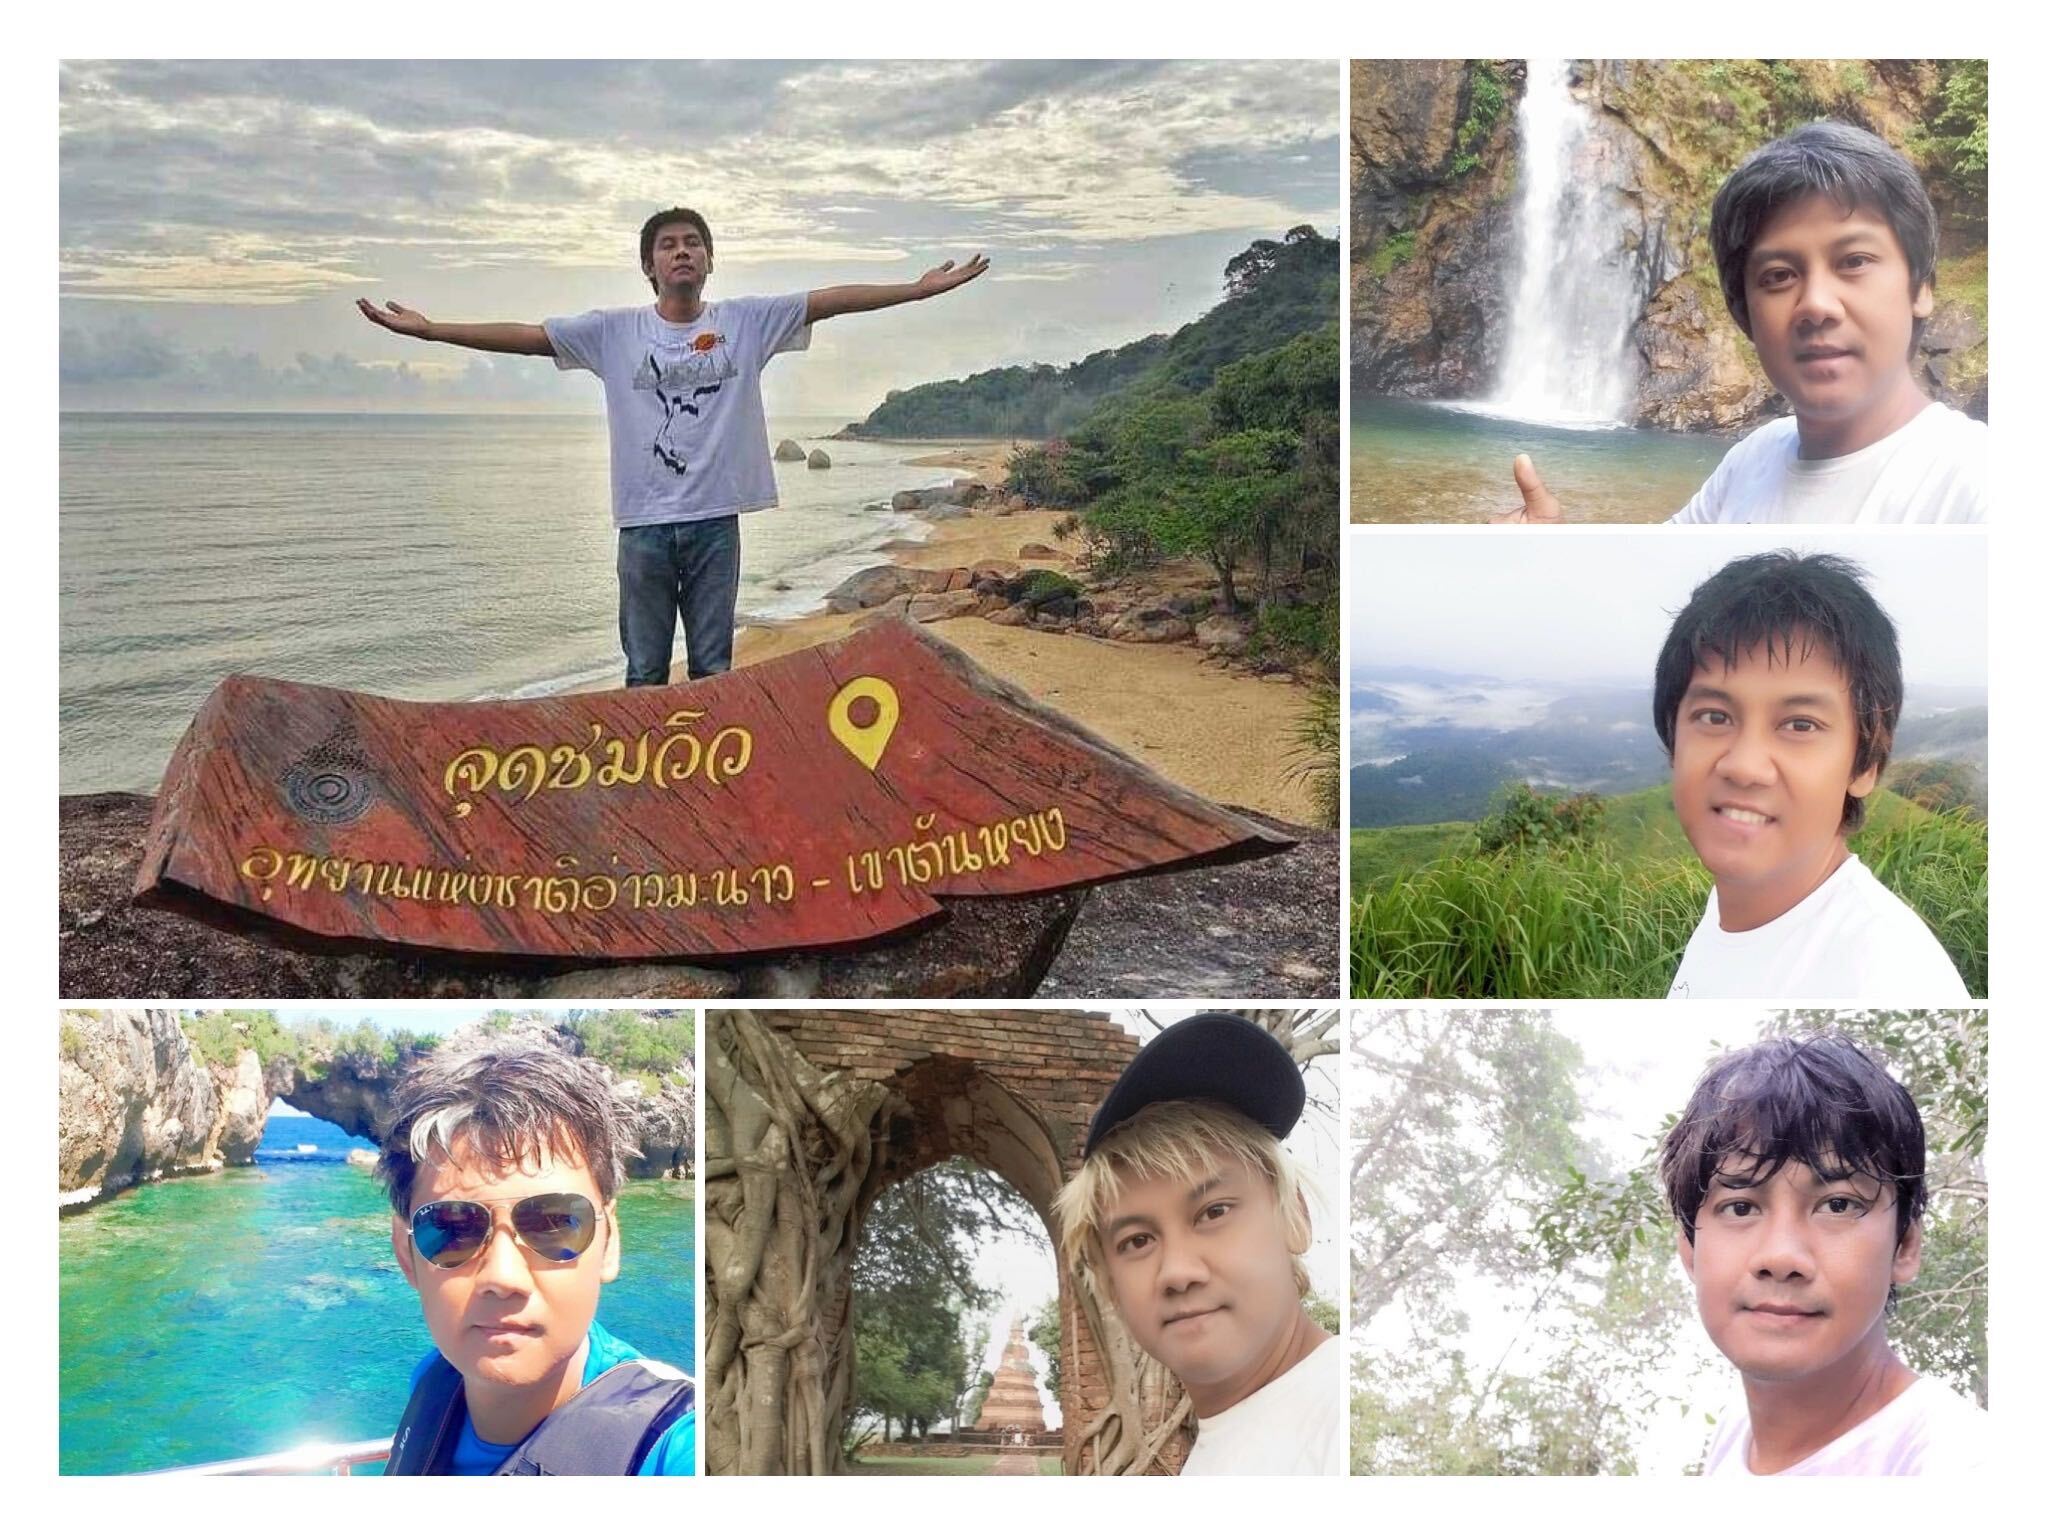 This man visited all of Thailand’s 155 national parks in 17 months